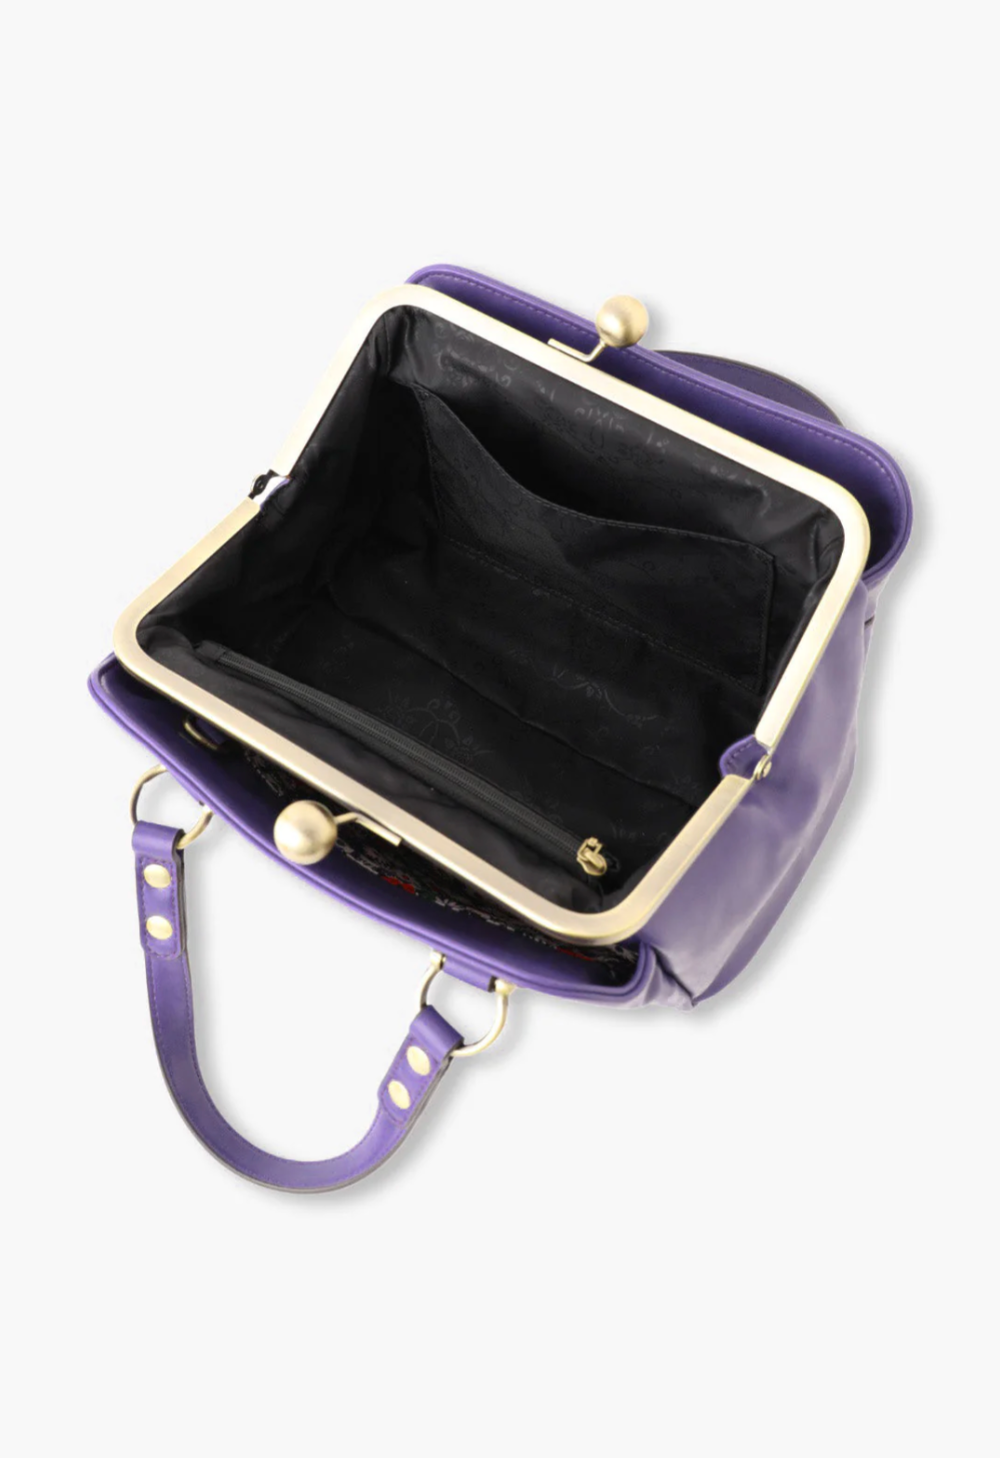 Central compartment, metal ball clasp and frame, black fabric interior, and side zipper pocket